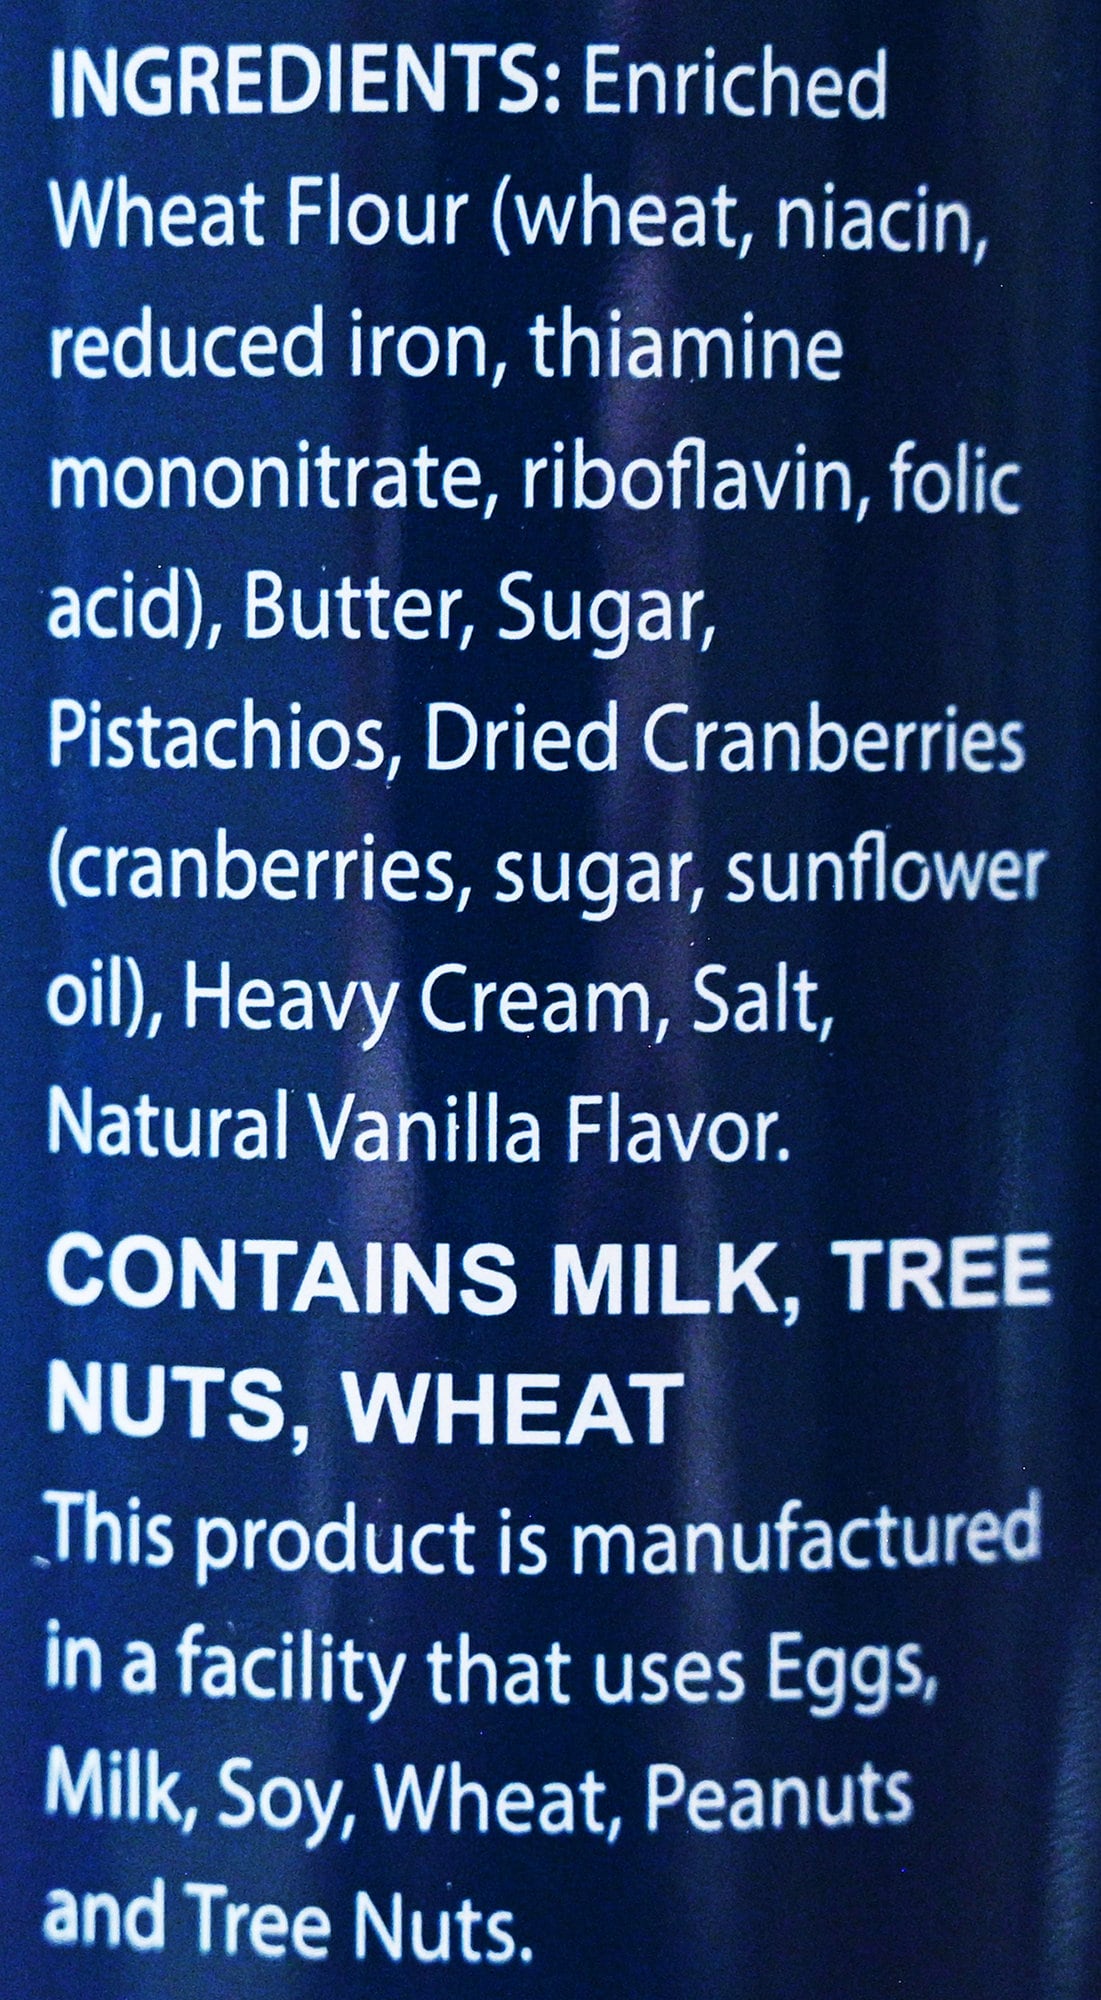 Image of the ingredients list for the cookies from the tin.